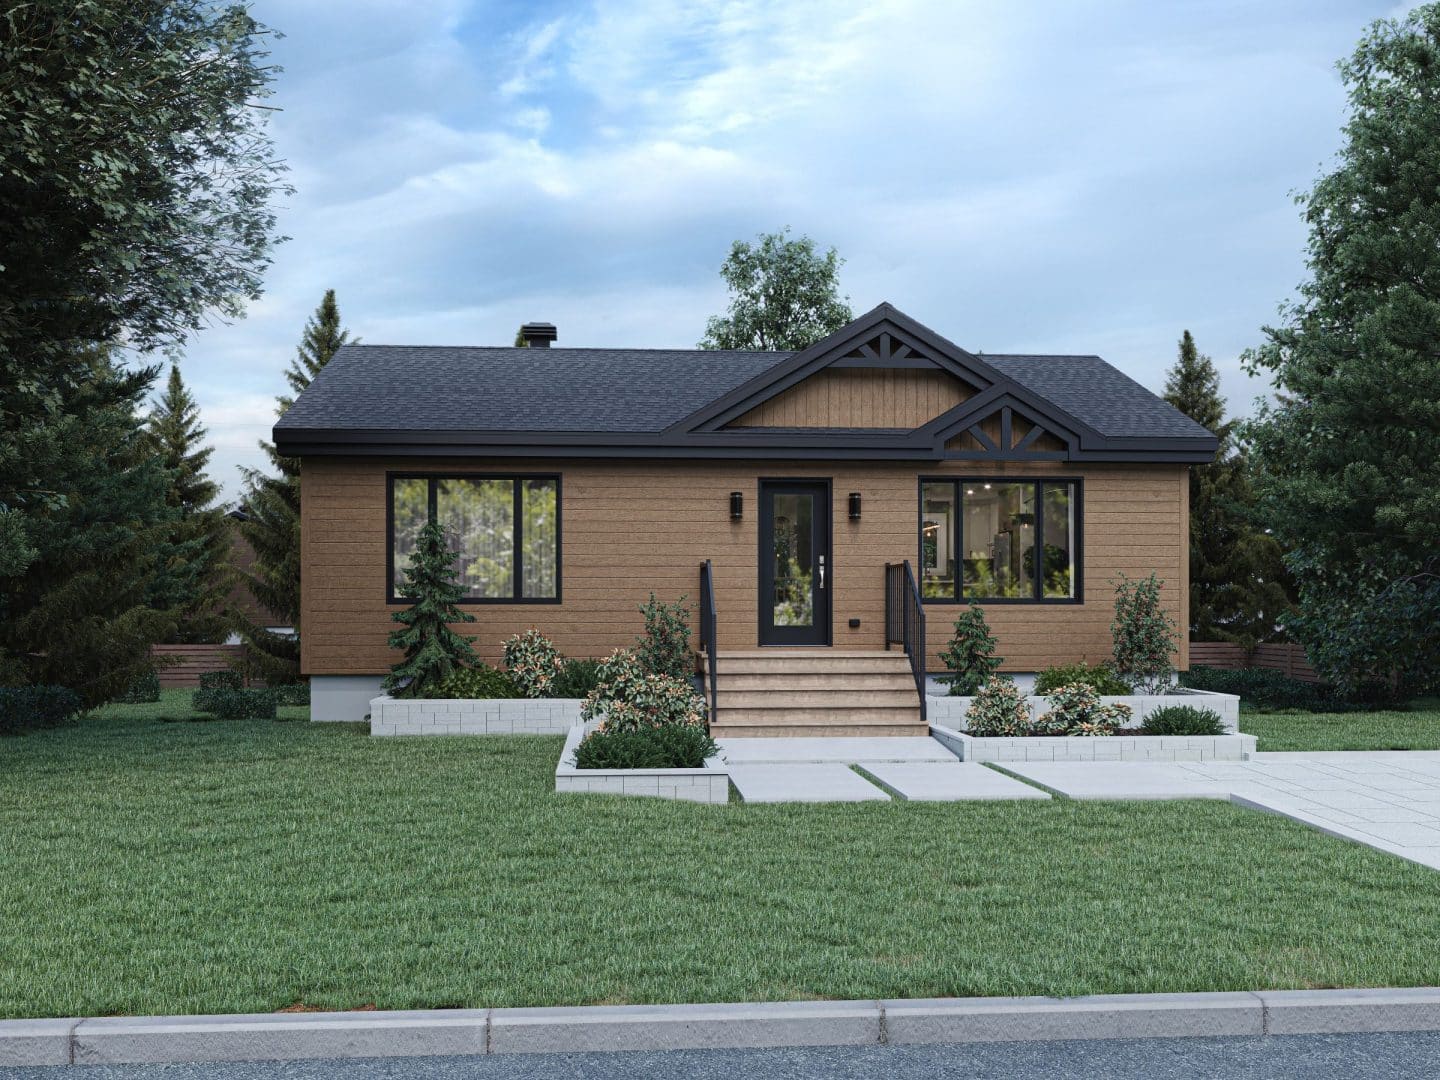 Mignonne model, a single-storey home in classic style. View from outside